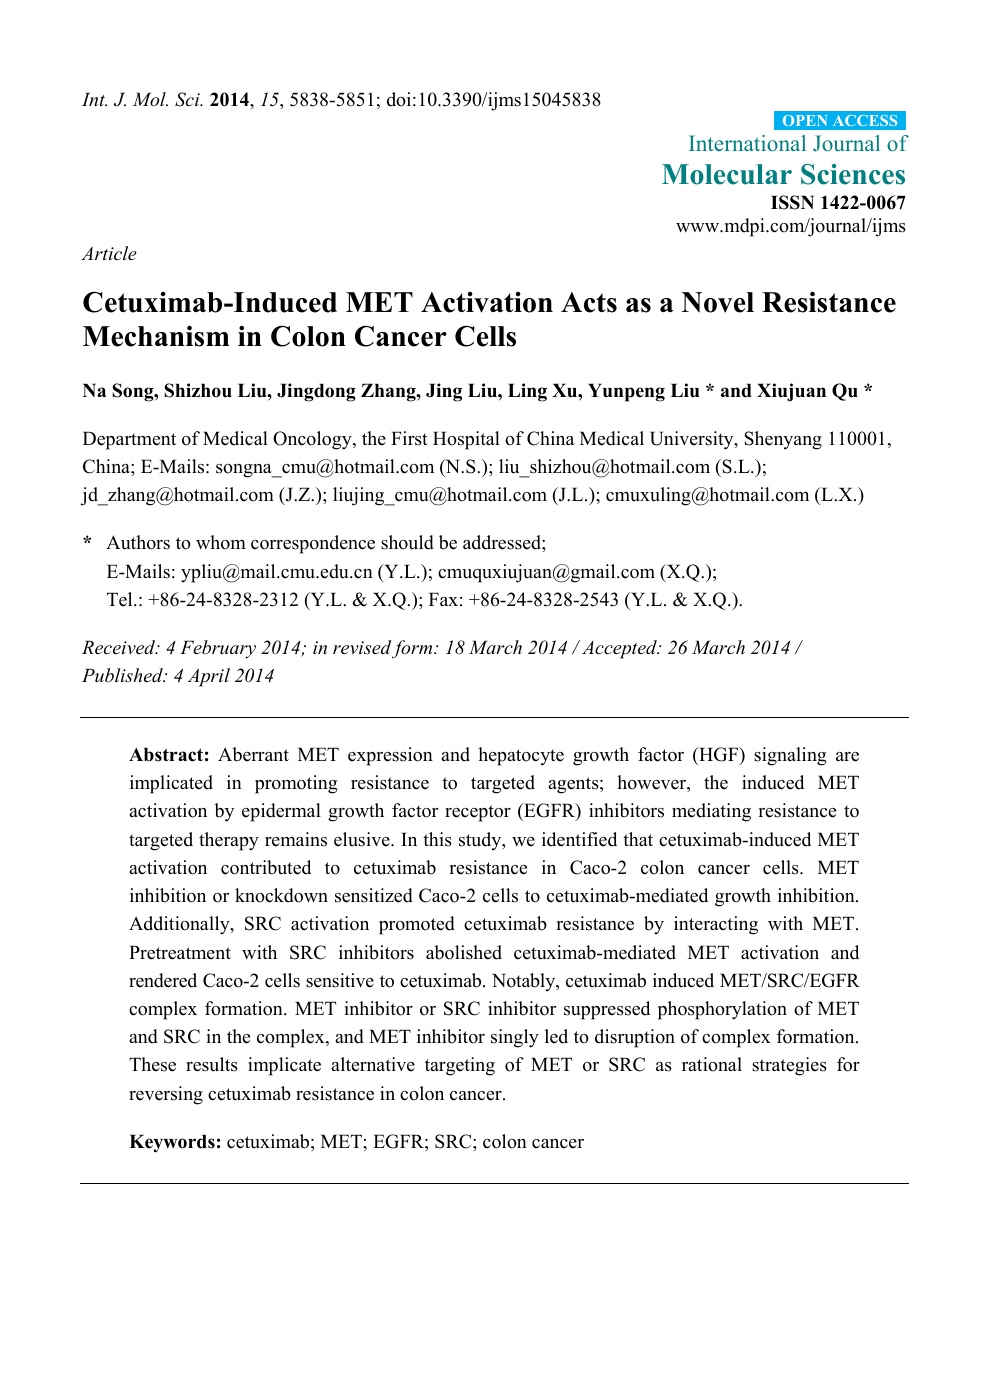 Cetuximab Induced Met Activation Acts As A Novel Resistance Mechanism In Colon Cancer Cells Topic Of Research Paper In Biological Sciences Download Scholarly Article Pdf And Read For Free On Cyberleninka Open